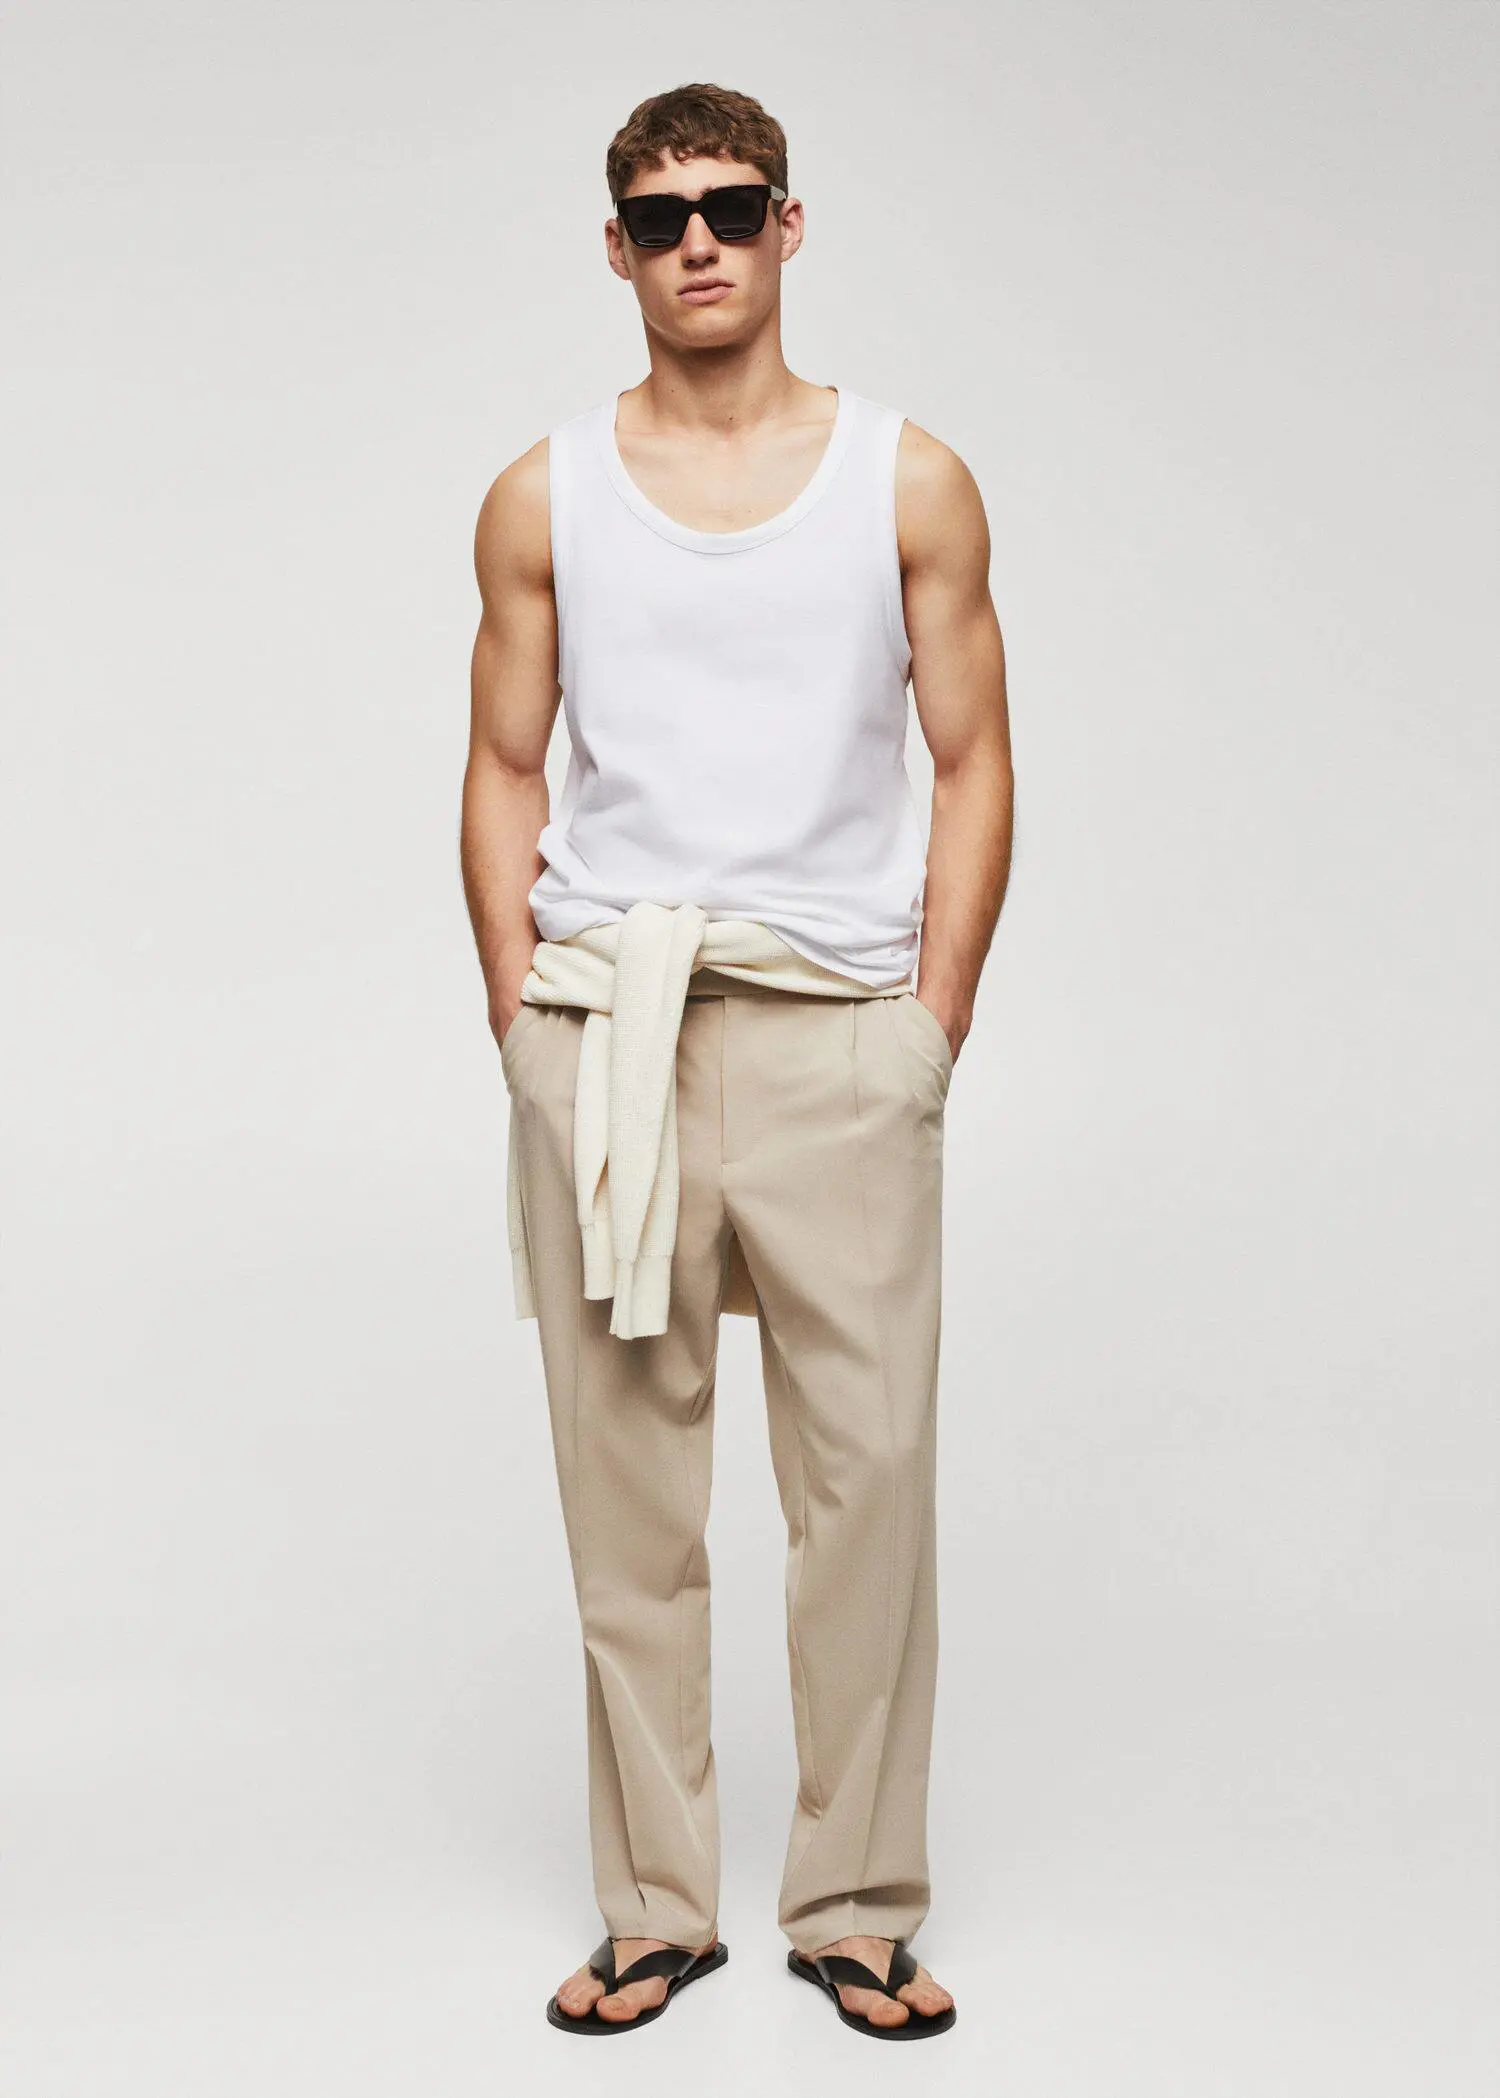 Mango Strap cotton T-shirt. a man in a white tank top and beige pants. 